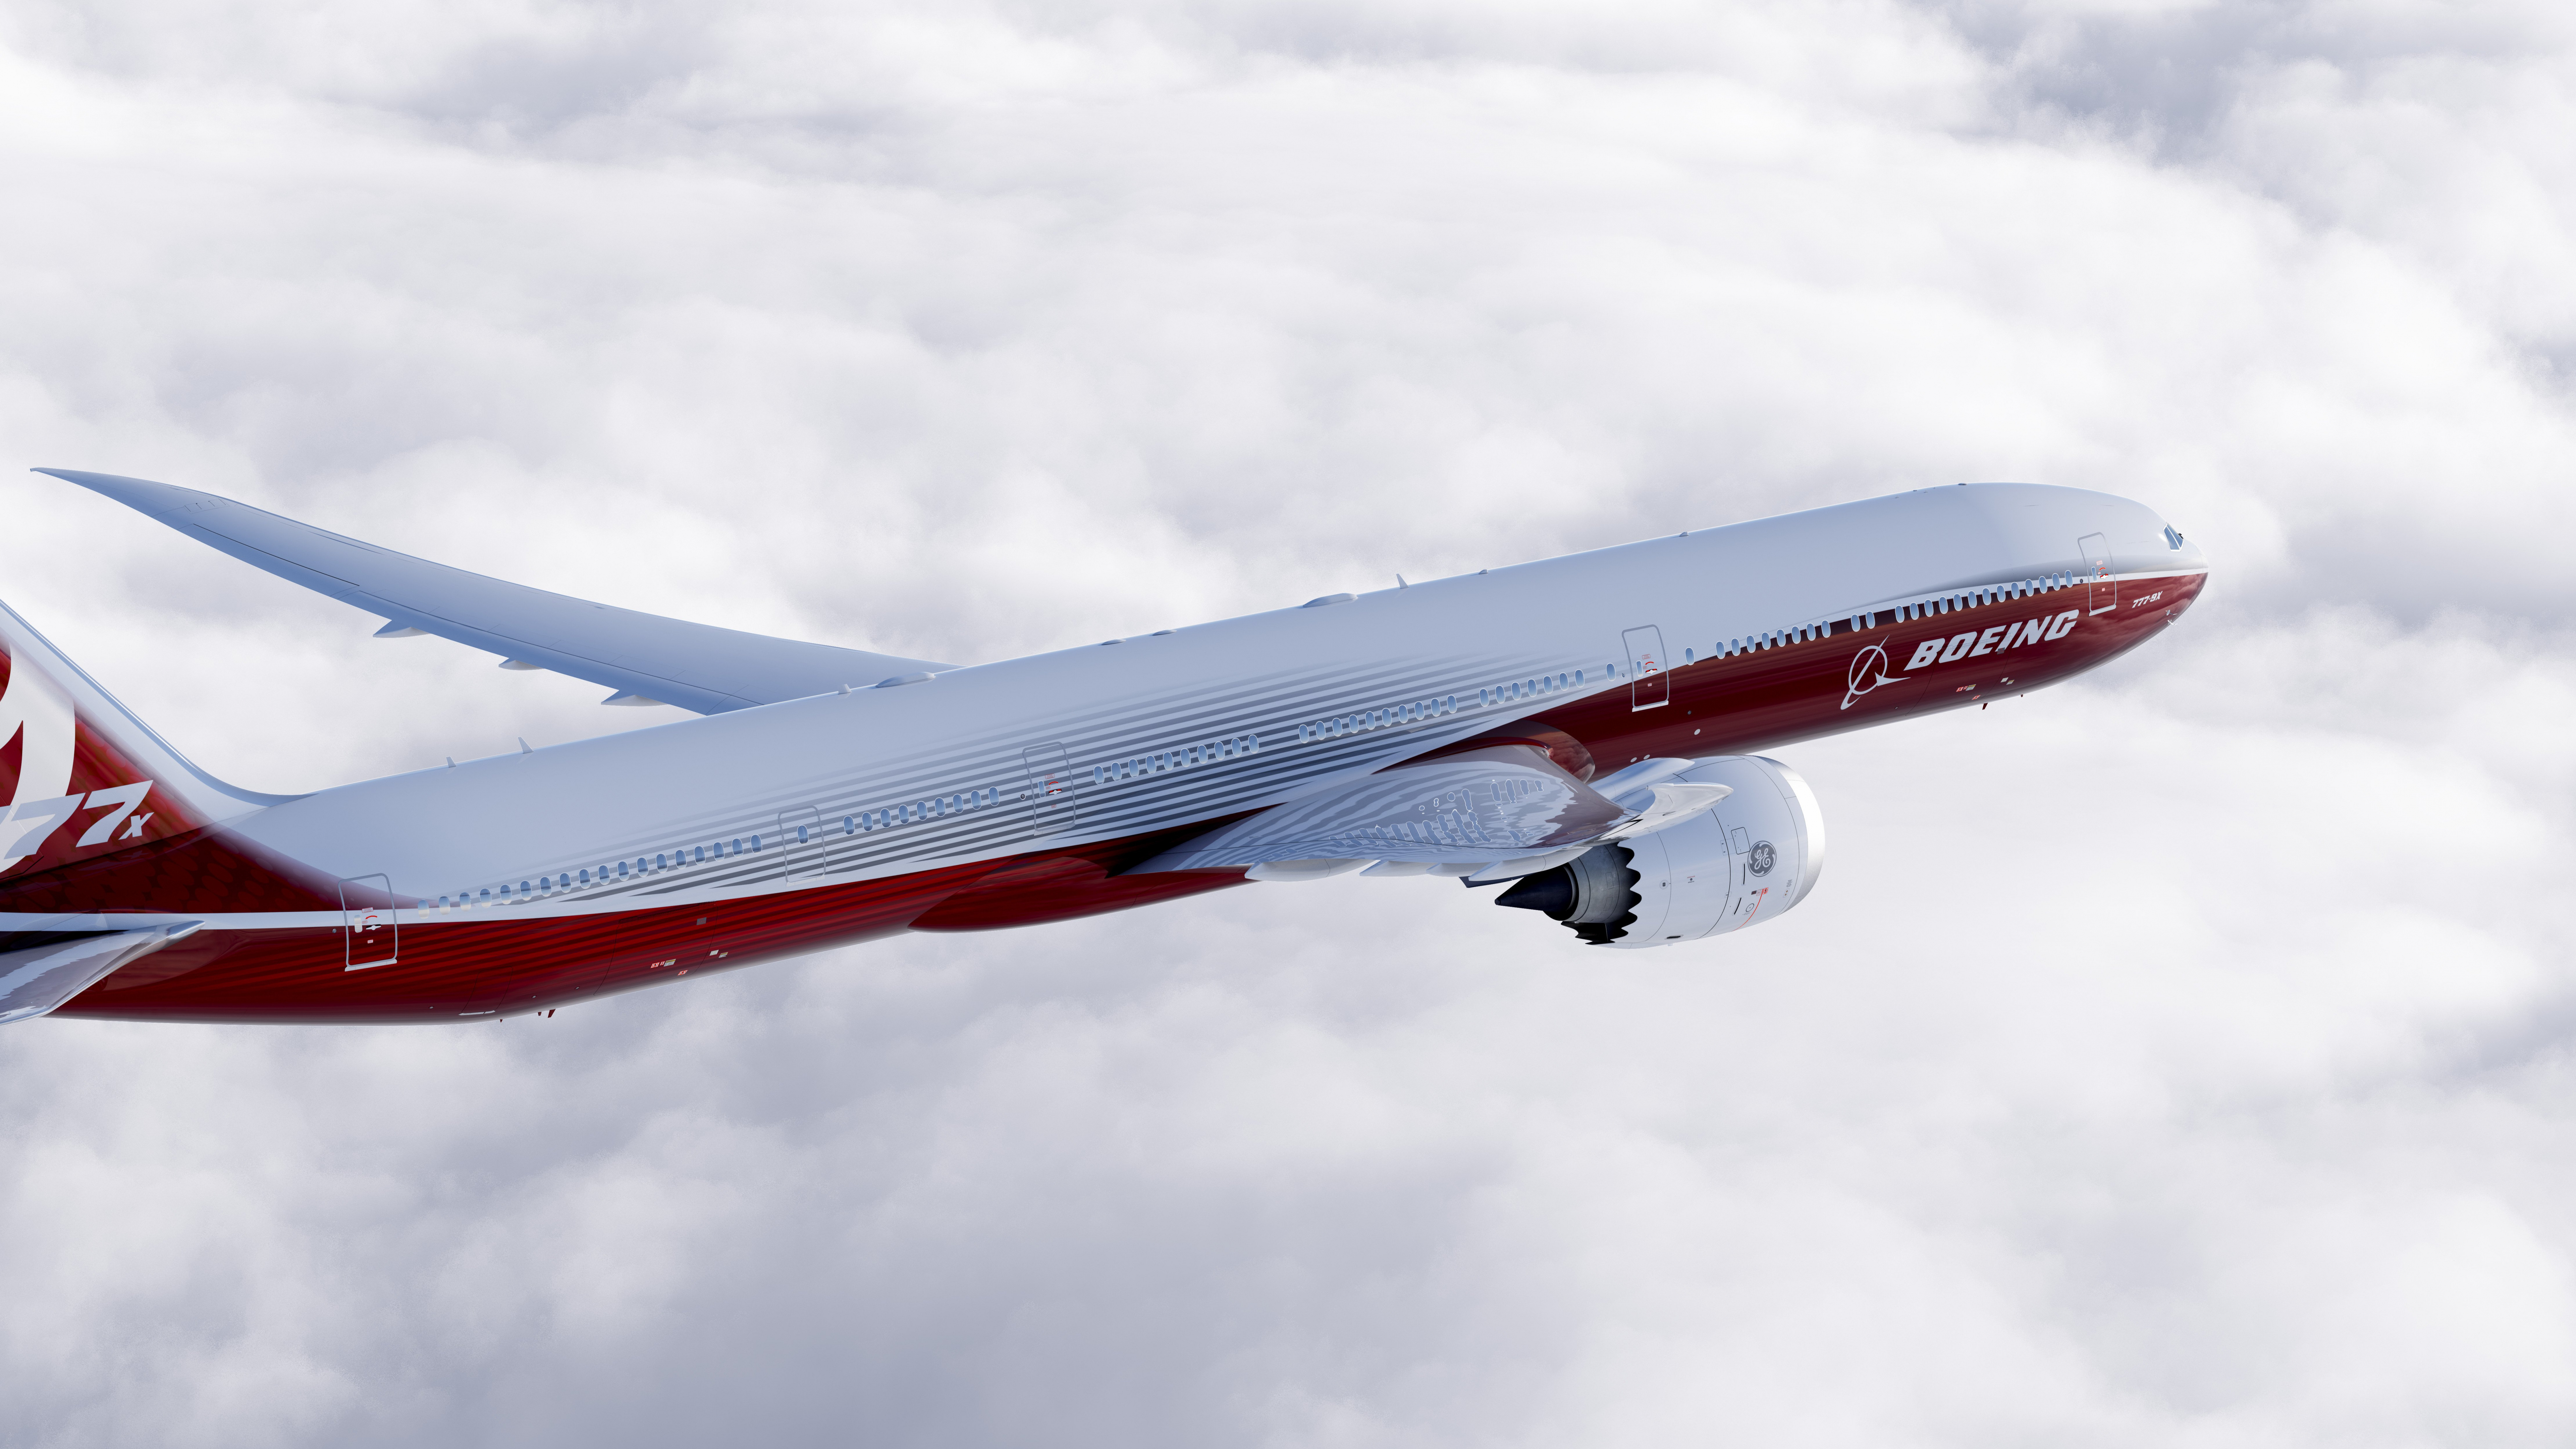 Red and White Airplane Under White Clouds During Daytime. Wallpaper in 7680x4320 Resolution